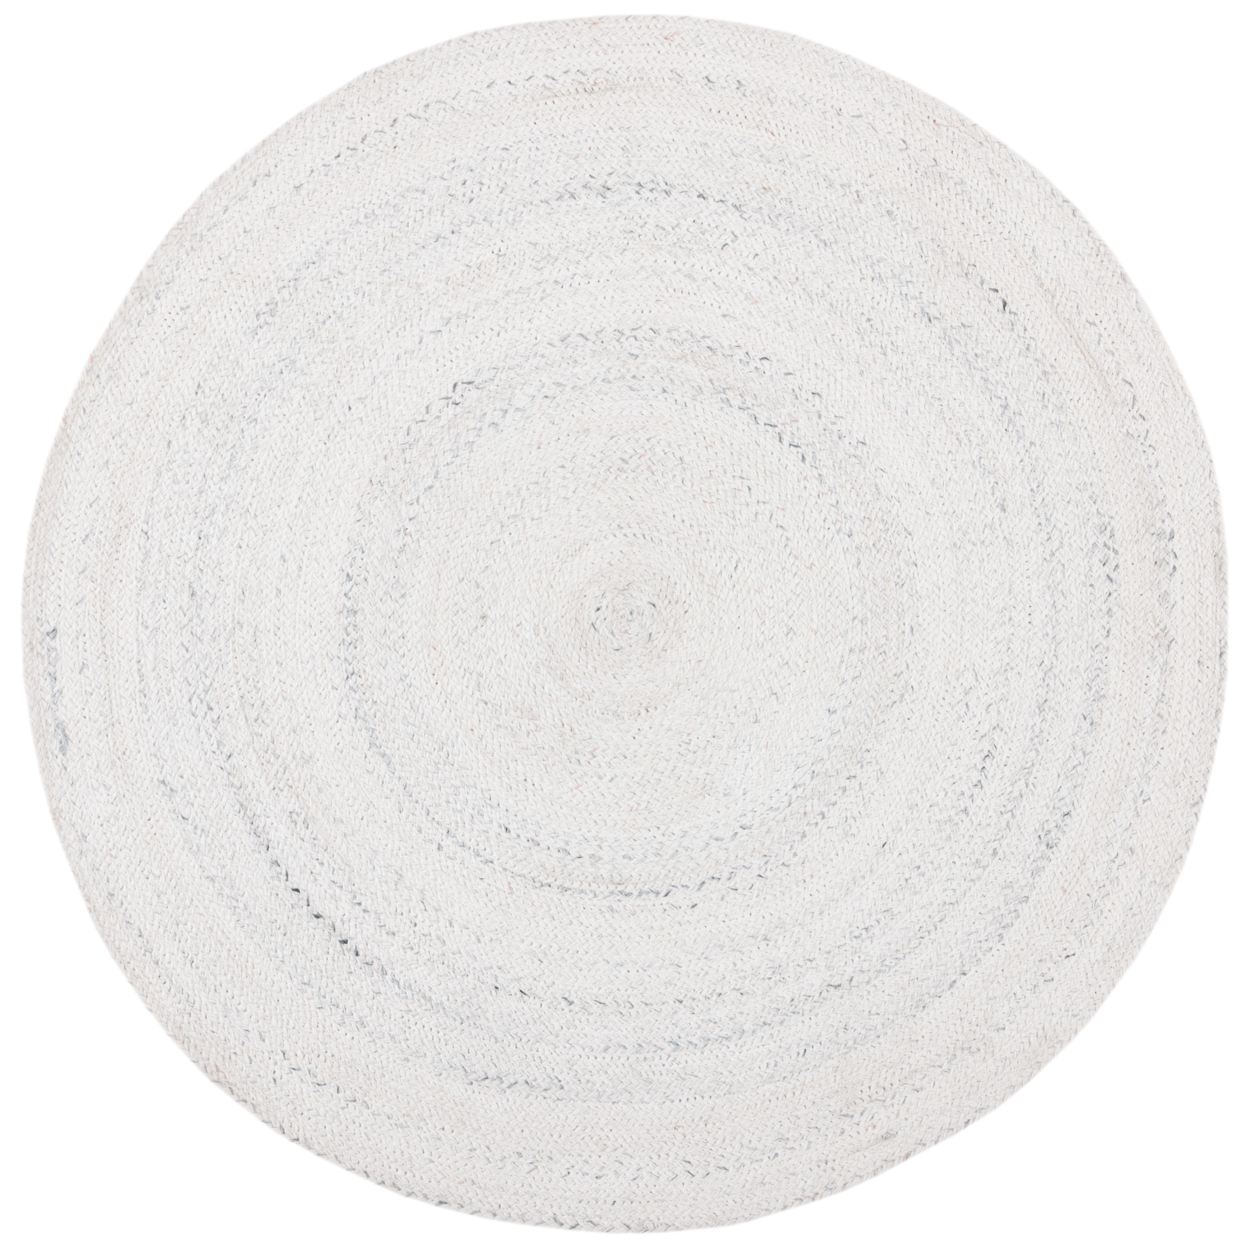 SAFAVIEH Cape Cod Collection CAP224A Handwoven Ivory Rug - 4' Round